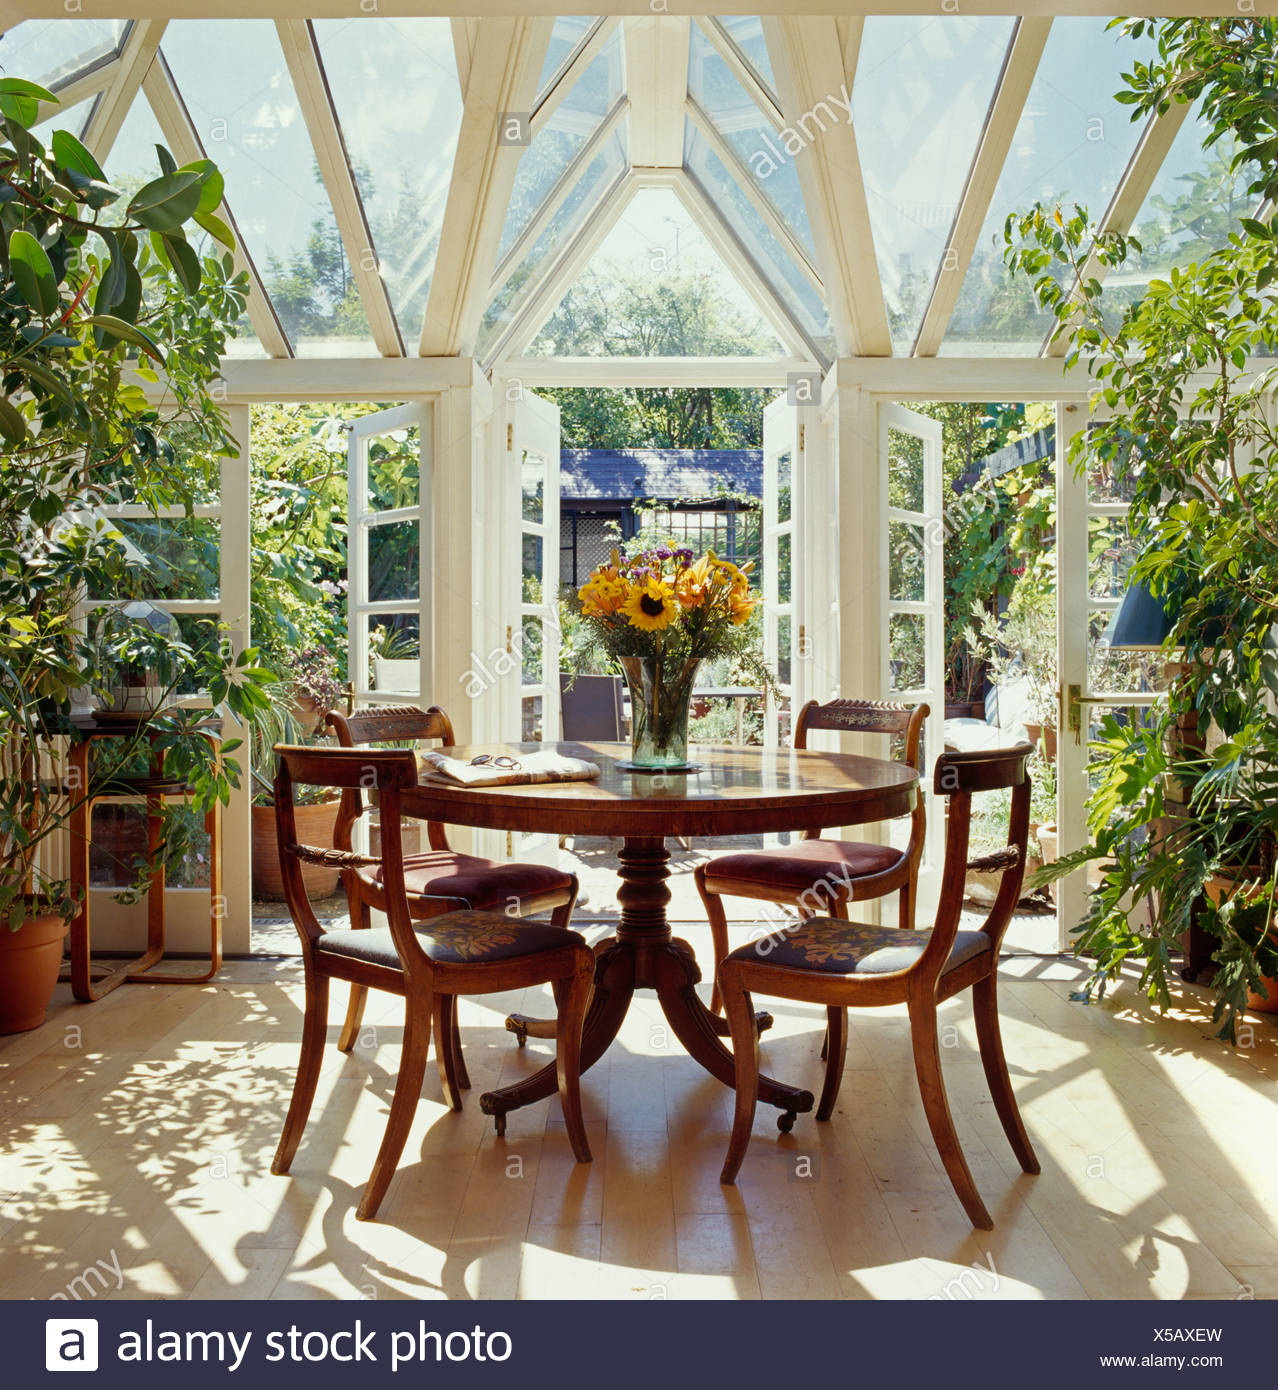 Interiors Conservatory Dining Rooms Traditional Stock Photos